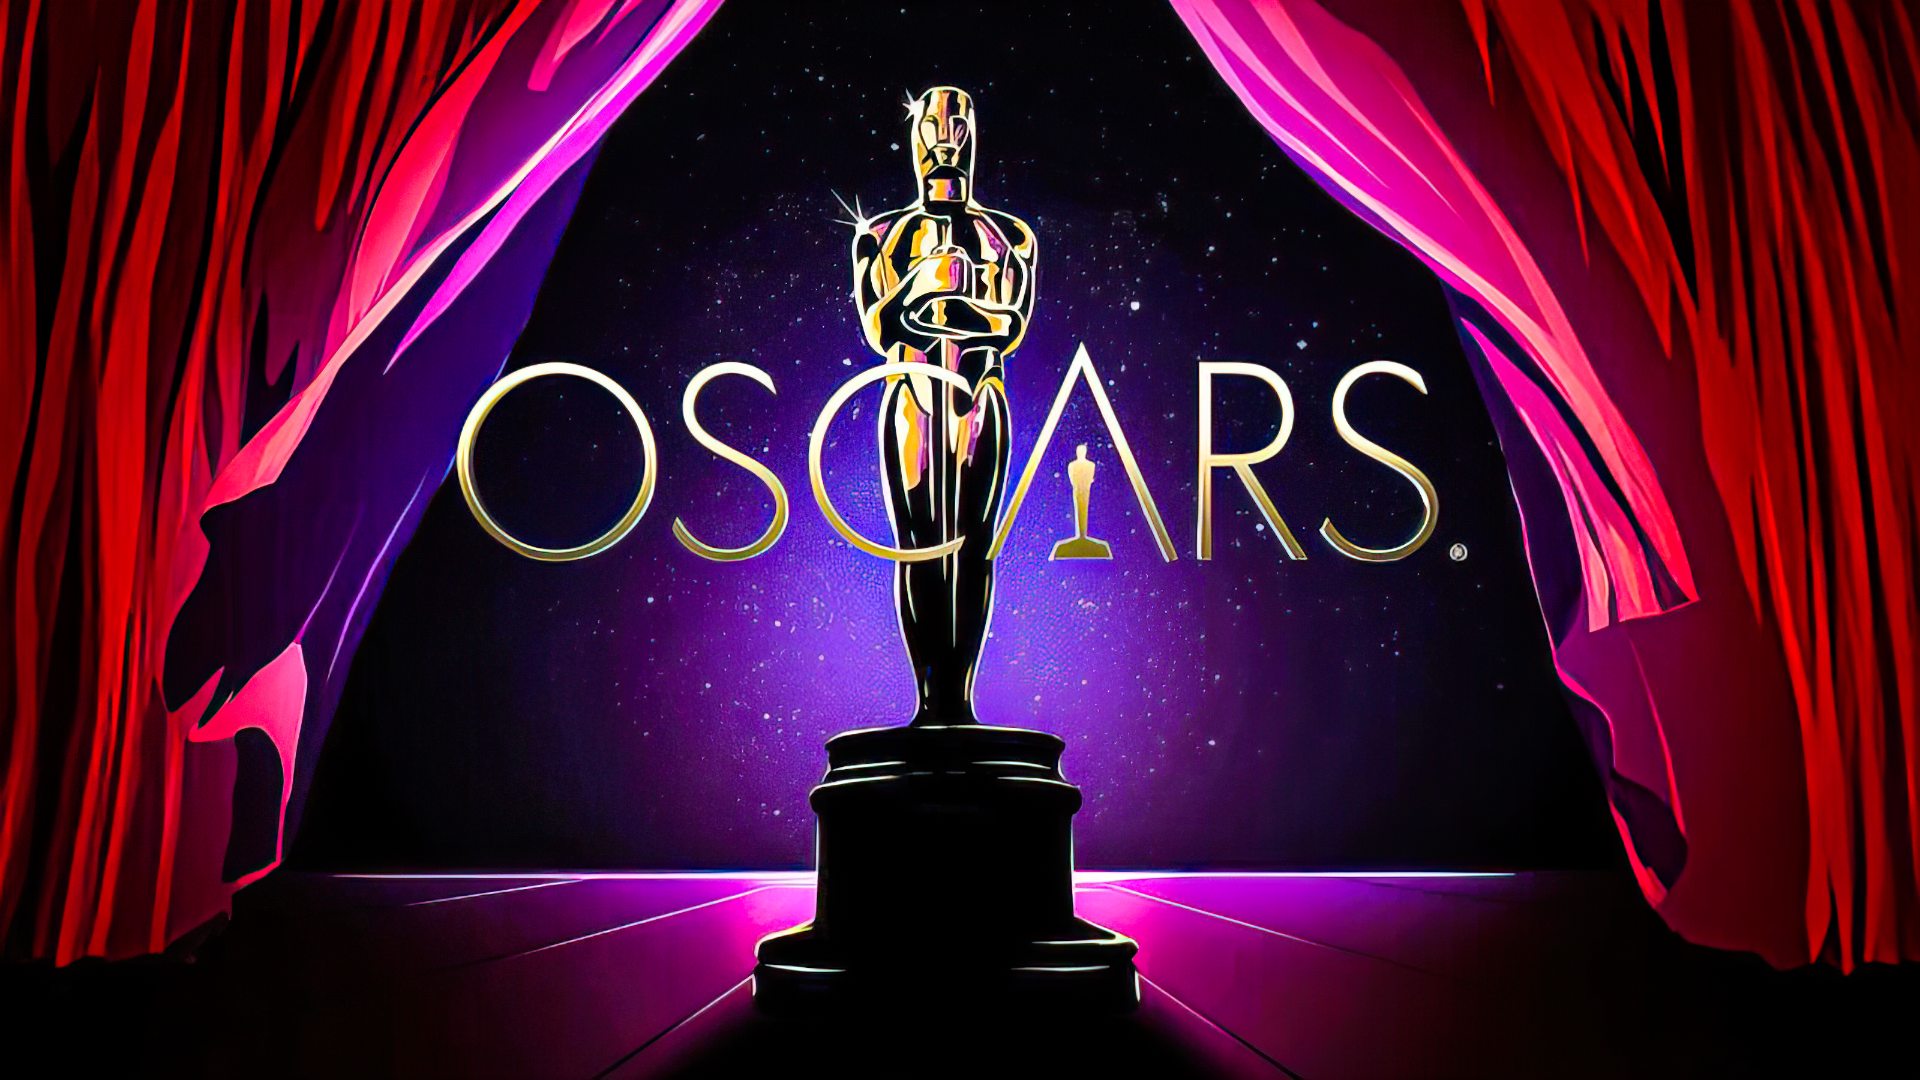 The 94th Annual Academy Awards (2022) Google Drive Download